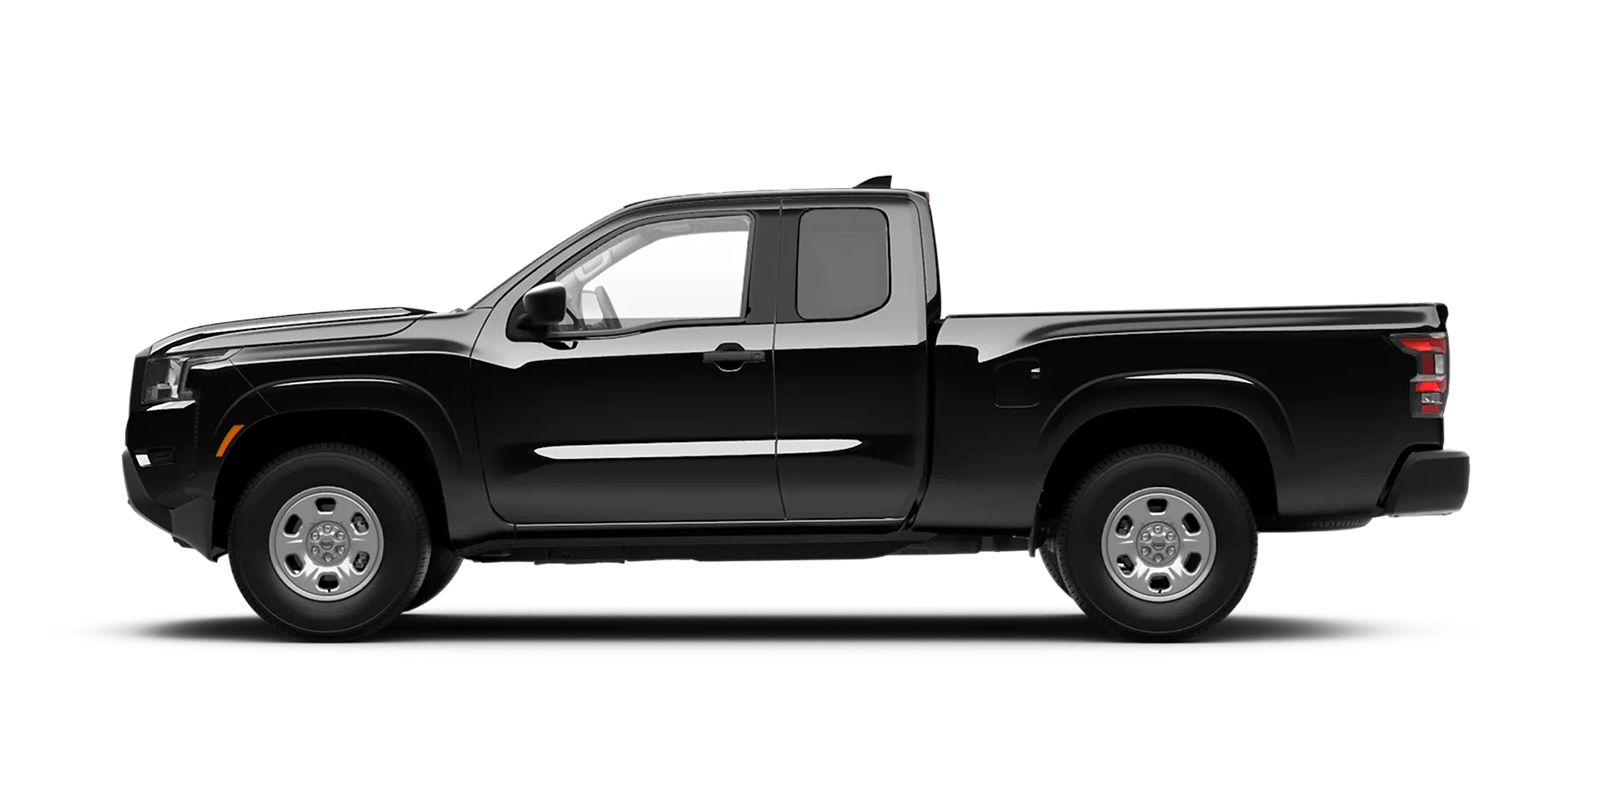 2022 Frontier King Cab S 4x2 in Super Black | Greenway Nissan of Florence in Florence AL